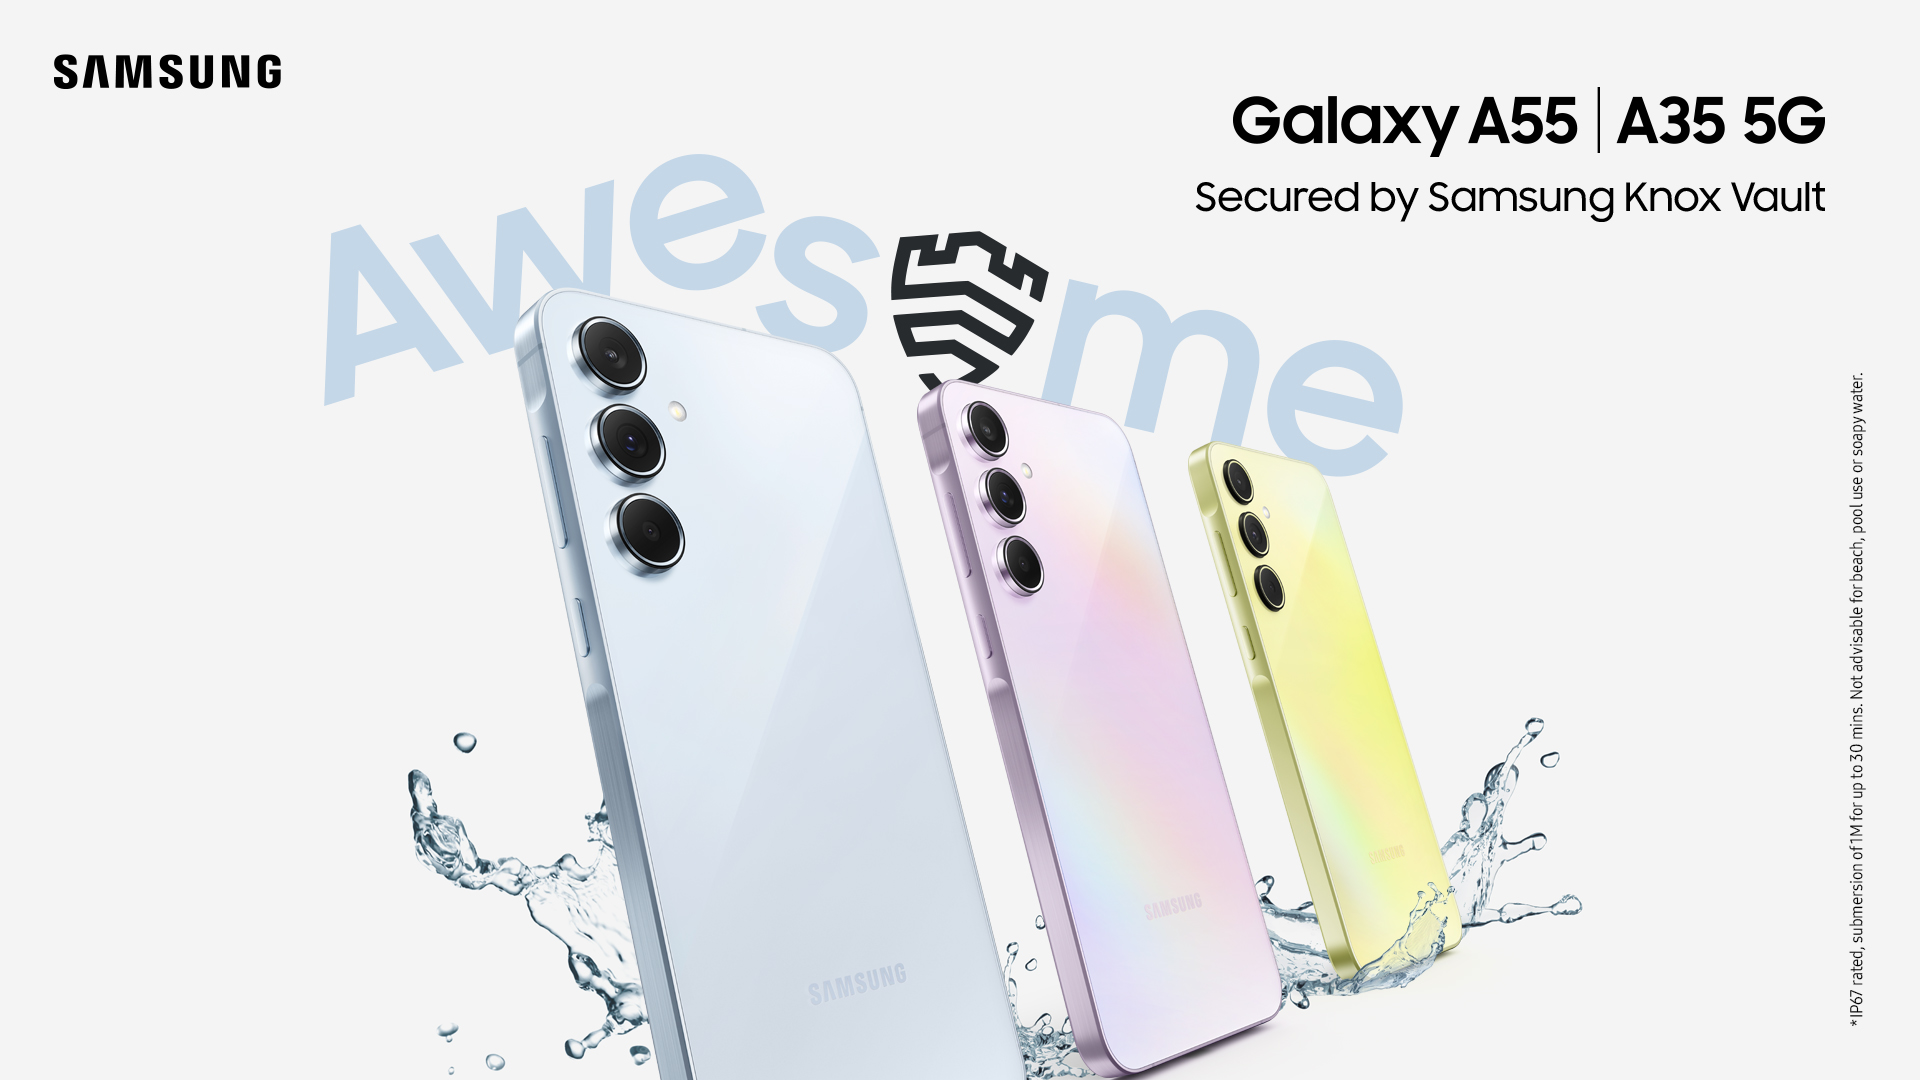 Meet the new Galaxy A55 5G and Galaxy A35 5G: Astounding. Affordable. Awesome.